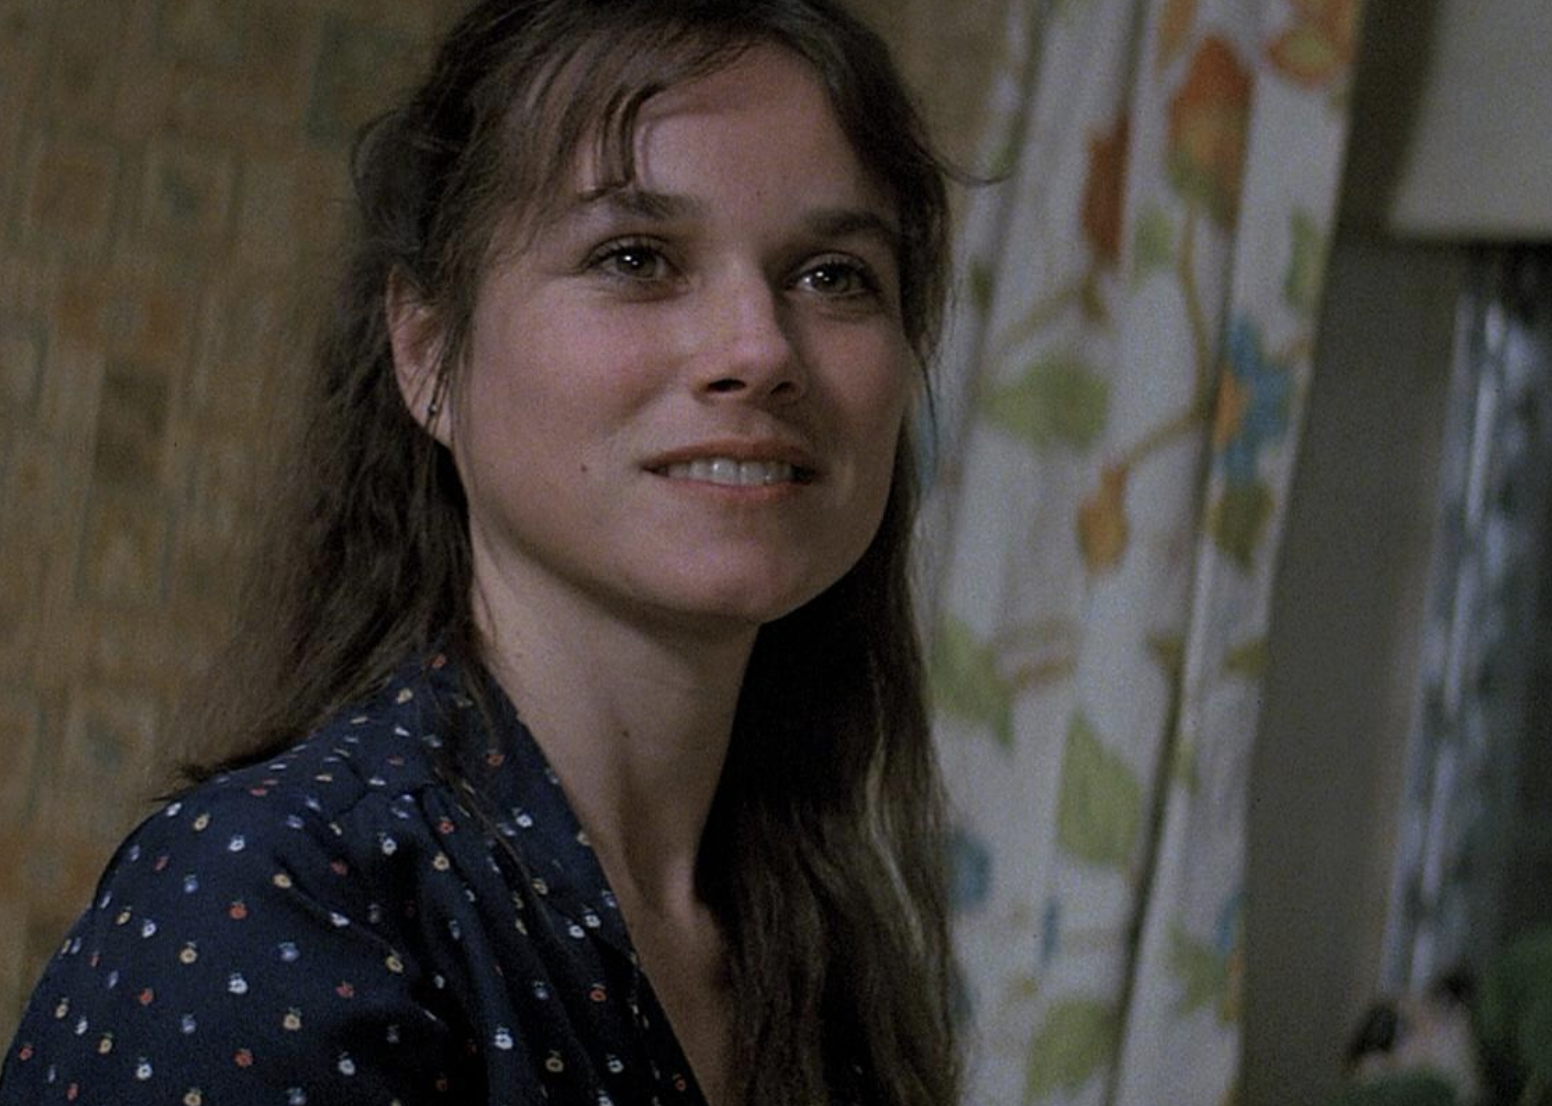 Barbara Hershey in a scene from "The Entity"